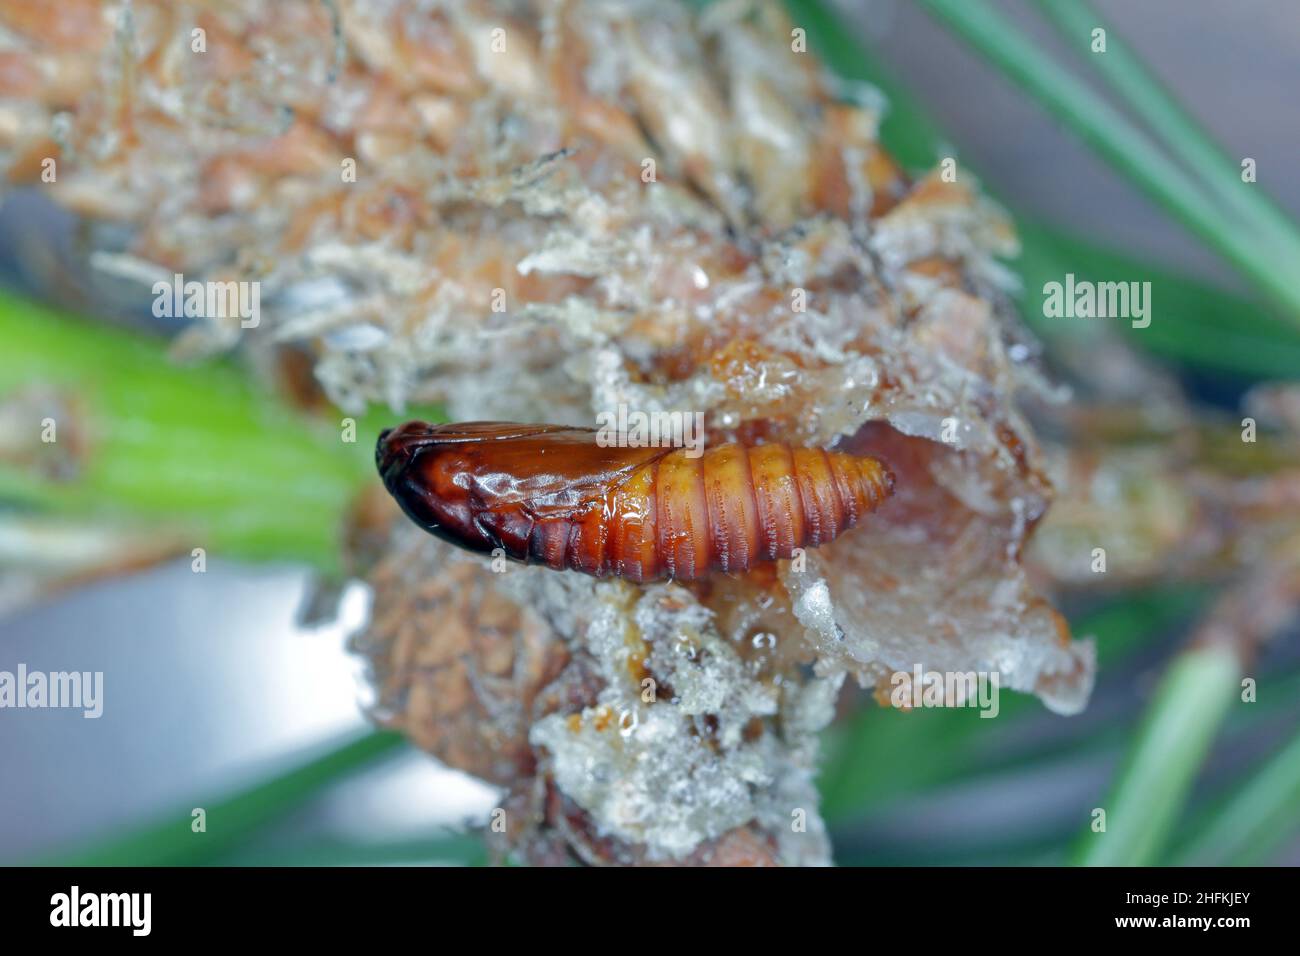 Pupa of Rhyacionia buoliana, the pine shoot moth, is a moth of the family Tortricidae. The larvae feed on young pine shoots. It is a dangerous pest. Stock Photo